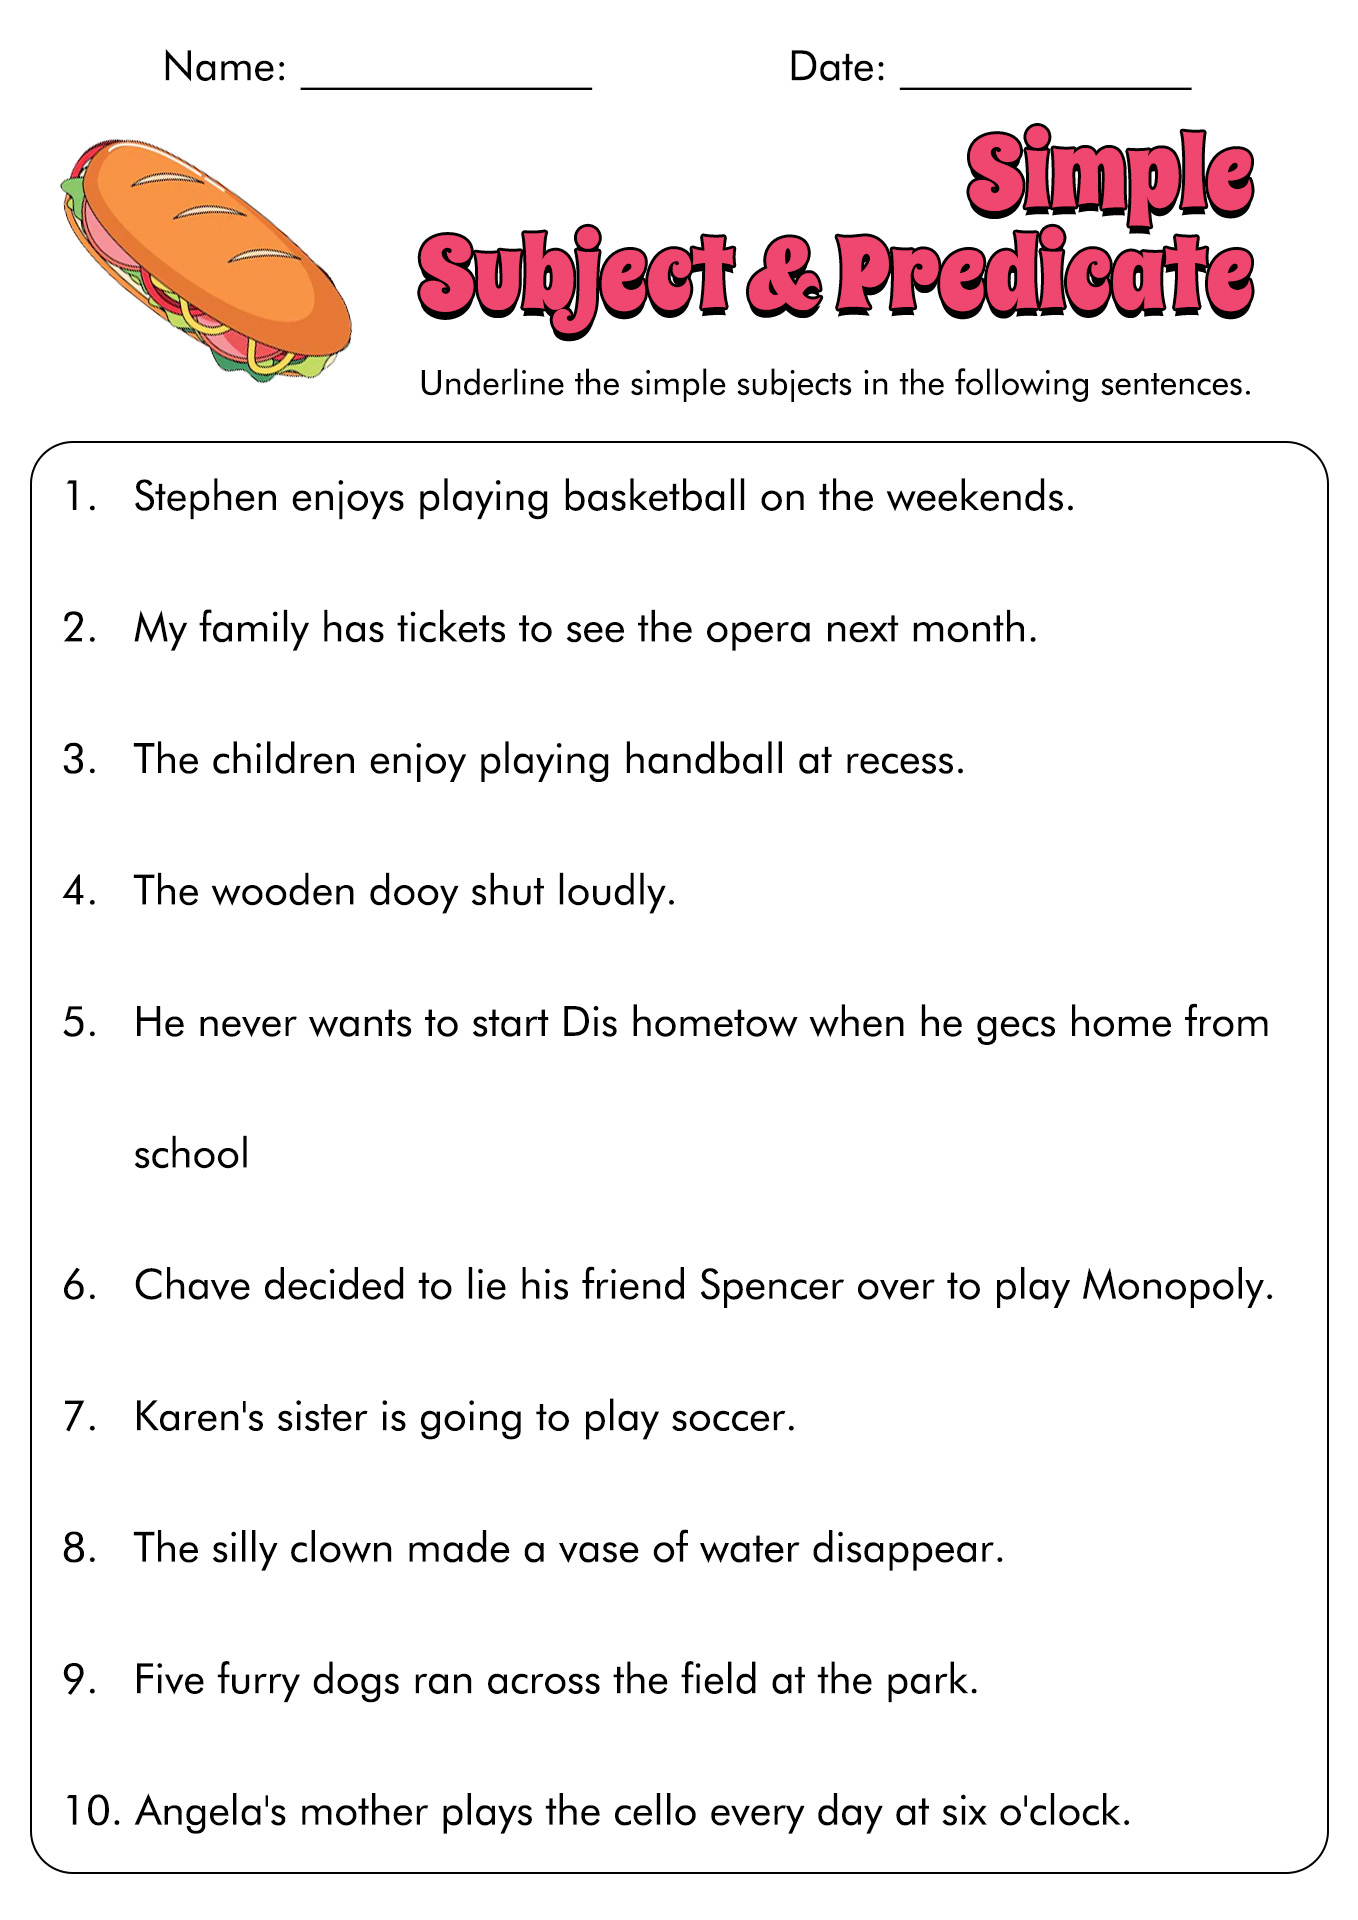 Subject and Predicate Sentences Worksheets for 3rd Image